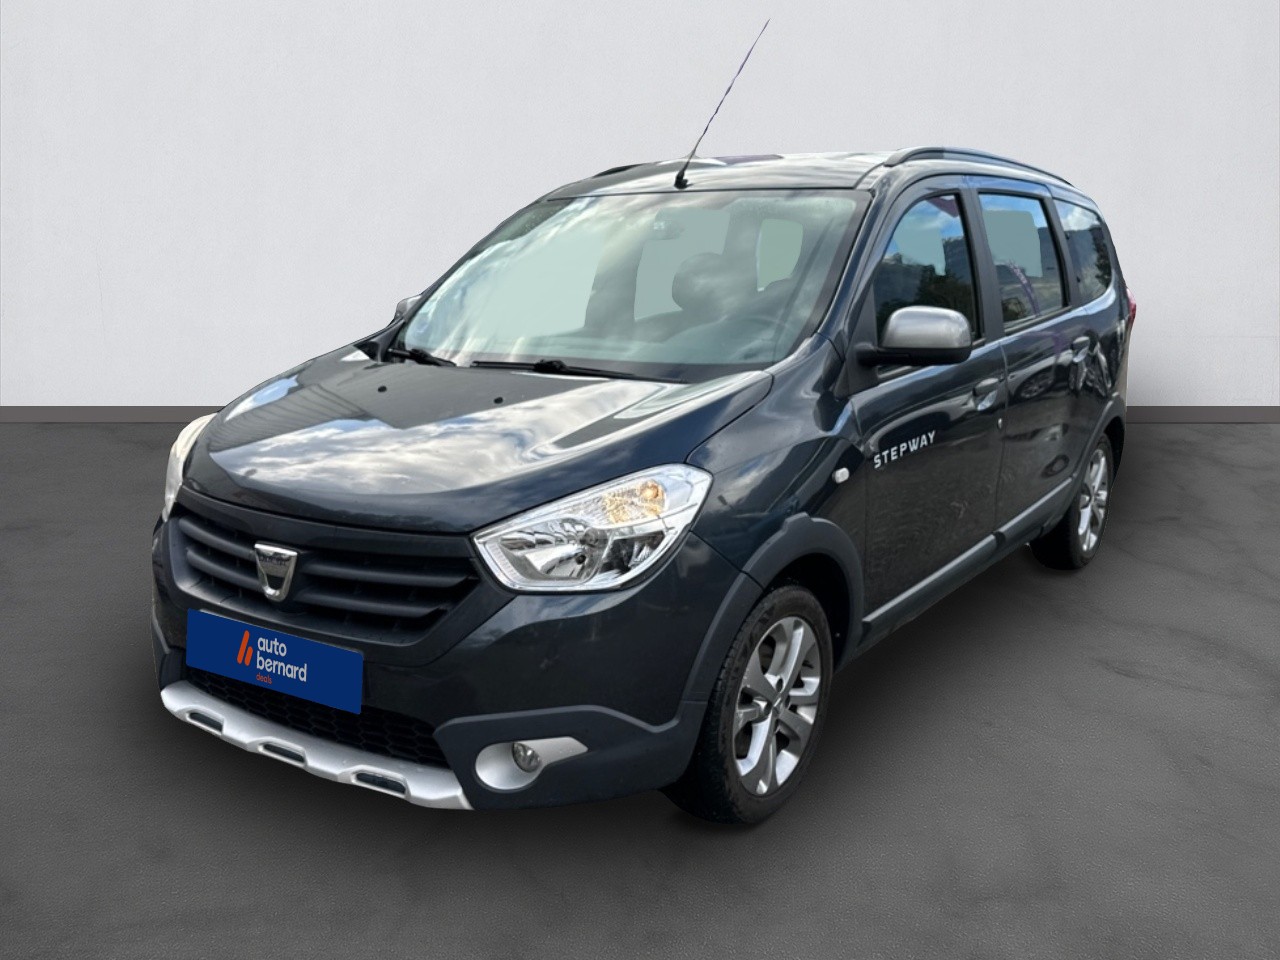 Lodgy 1.2 TCe 115ch Stepway 7 places